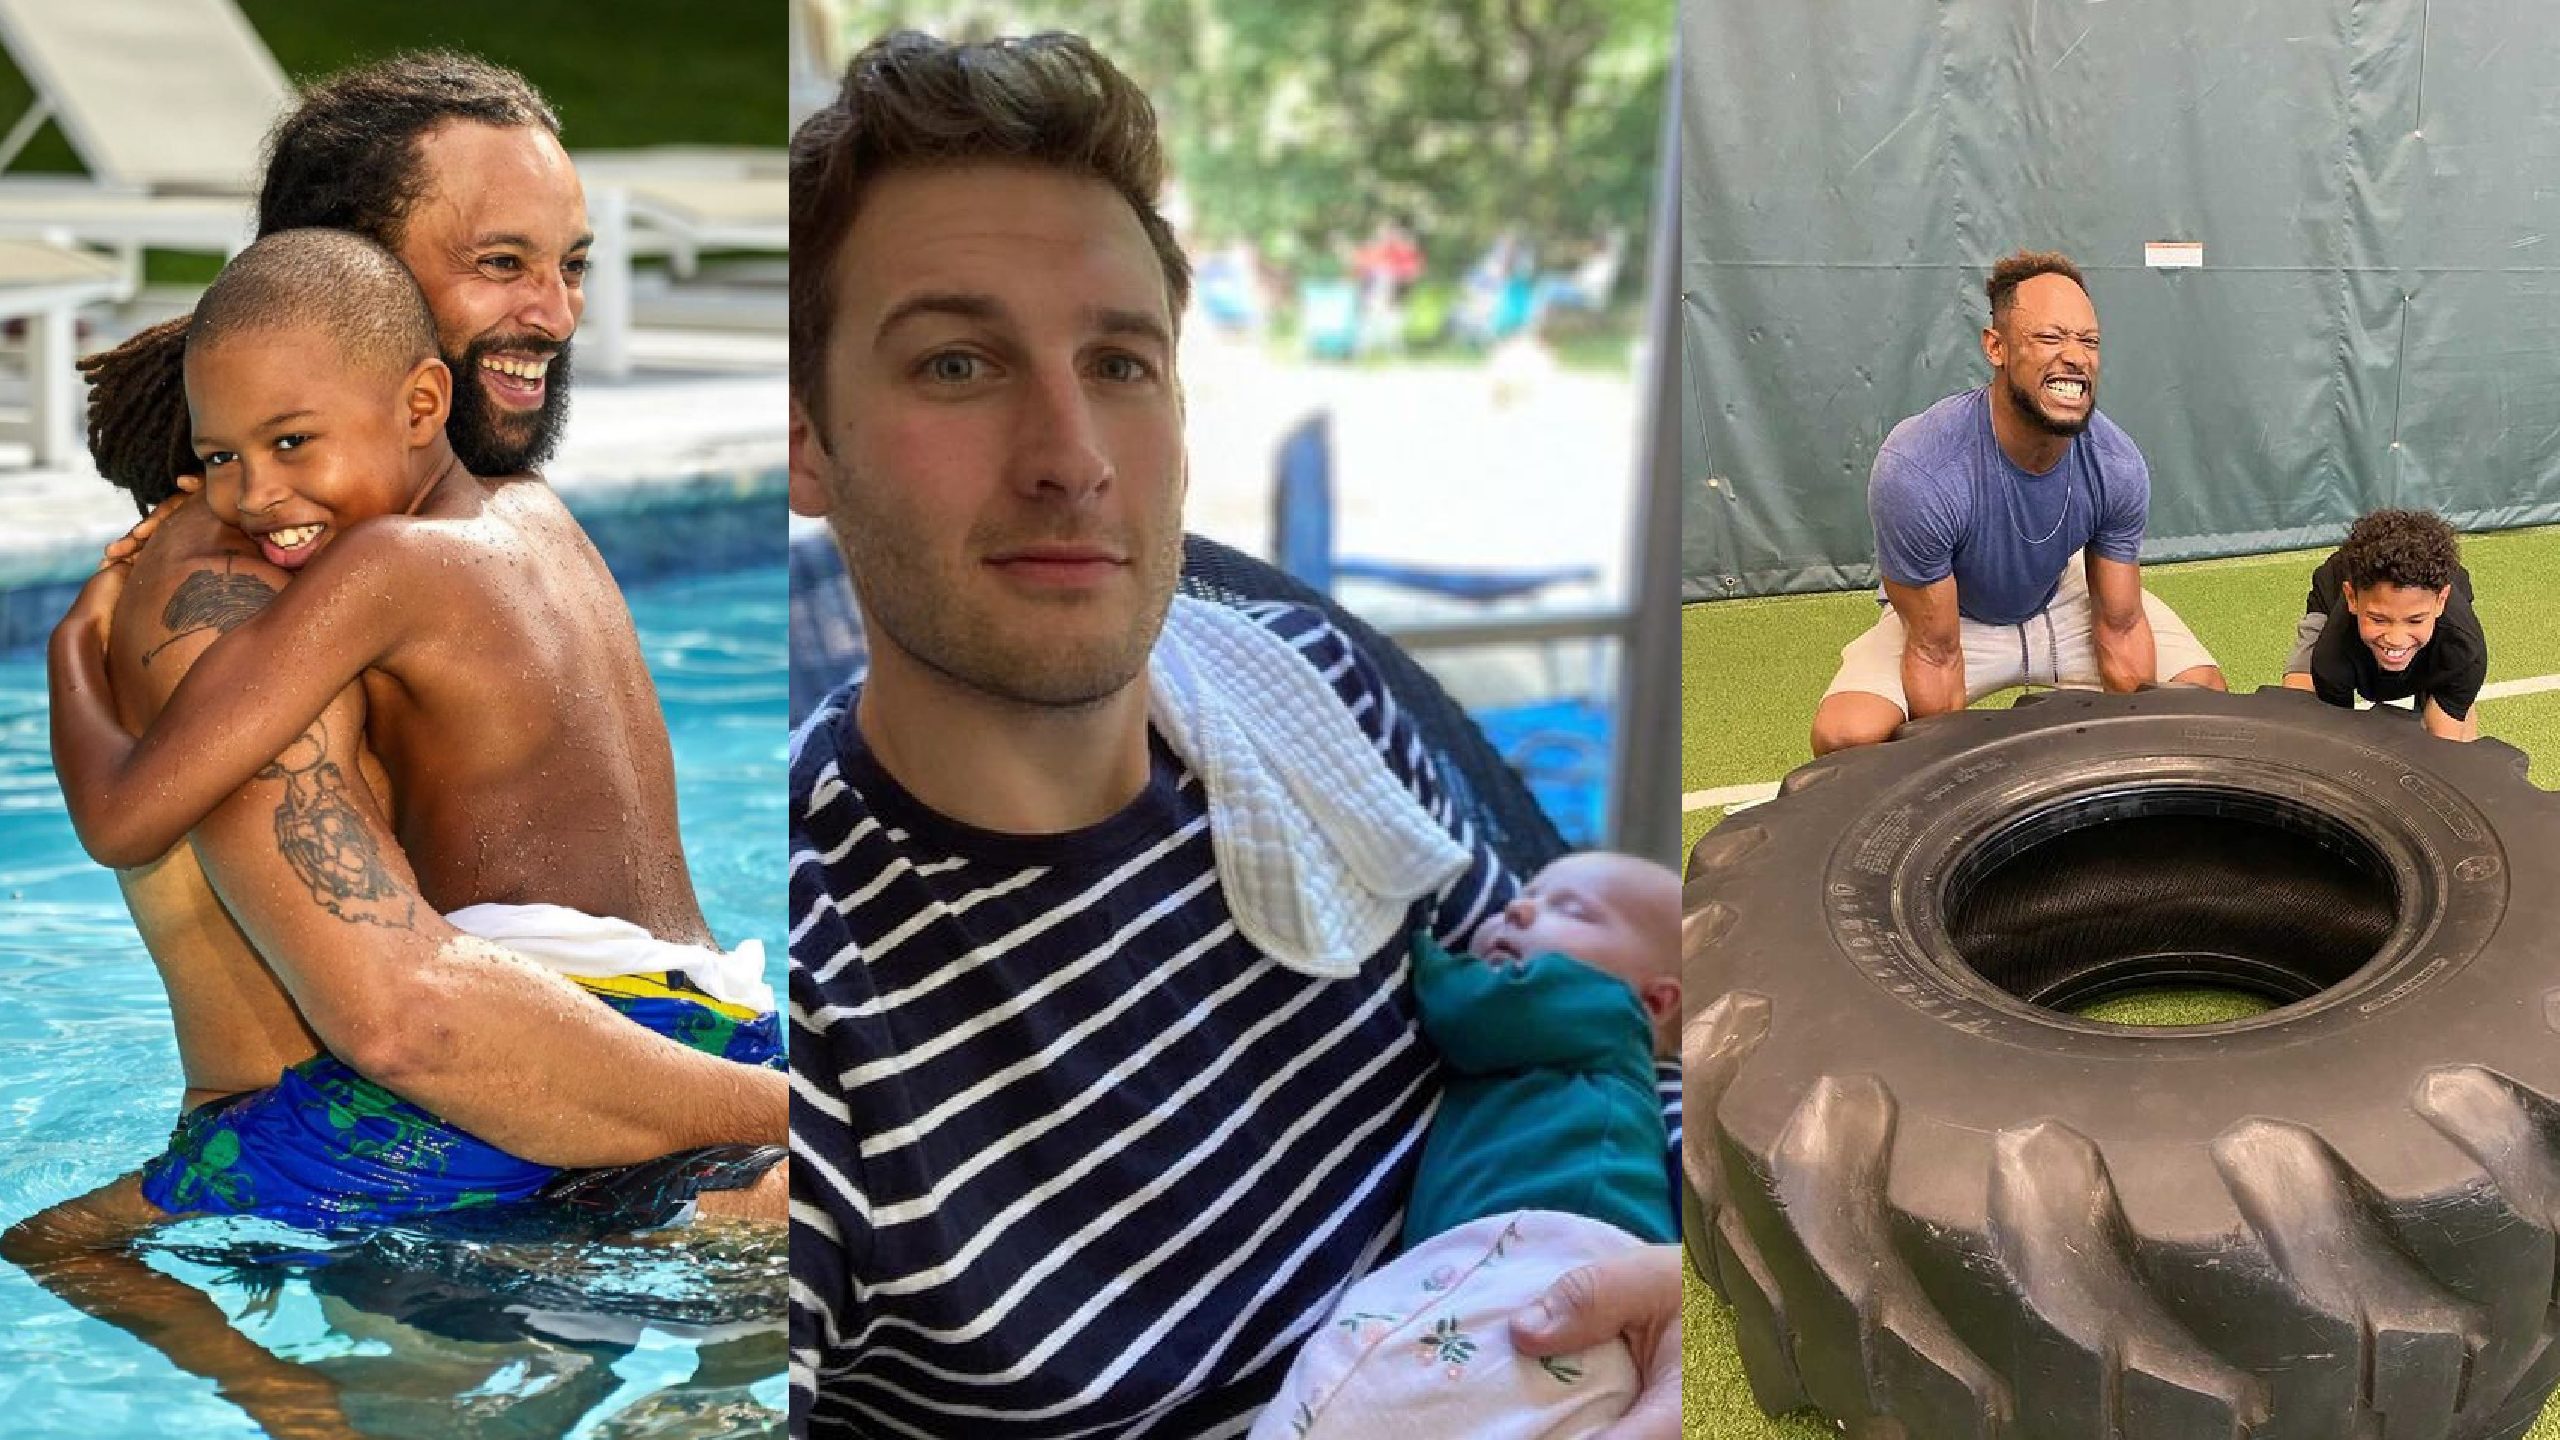 6 Dads On What Self-Care, Family, And Staying Active Means To Them